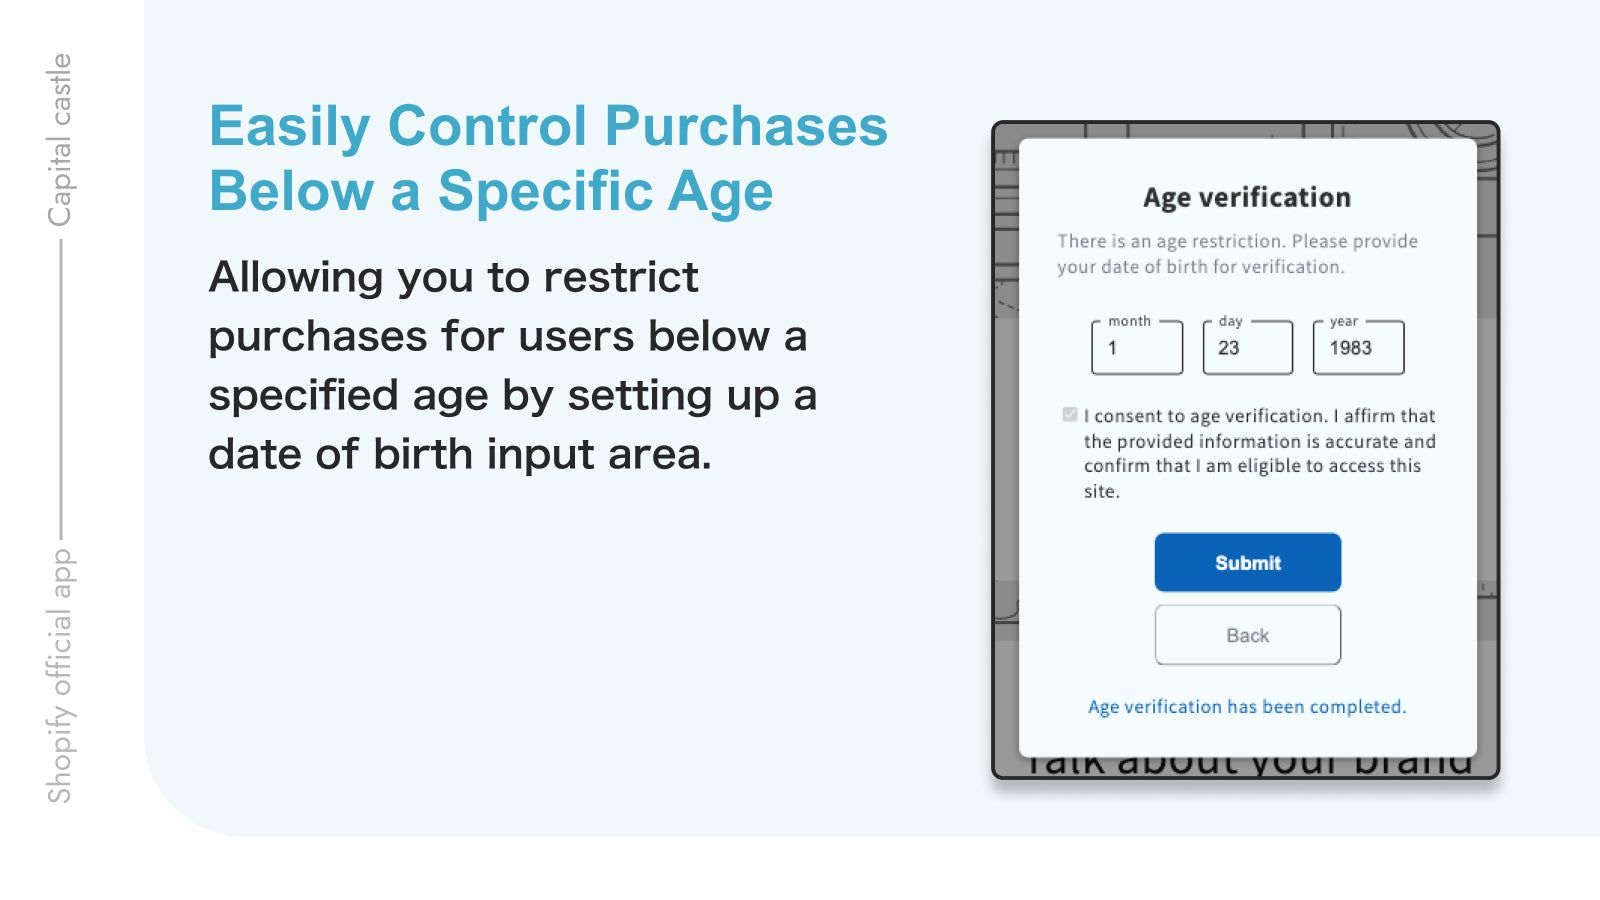 Easily Control Purchases Below a Specific Age